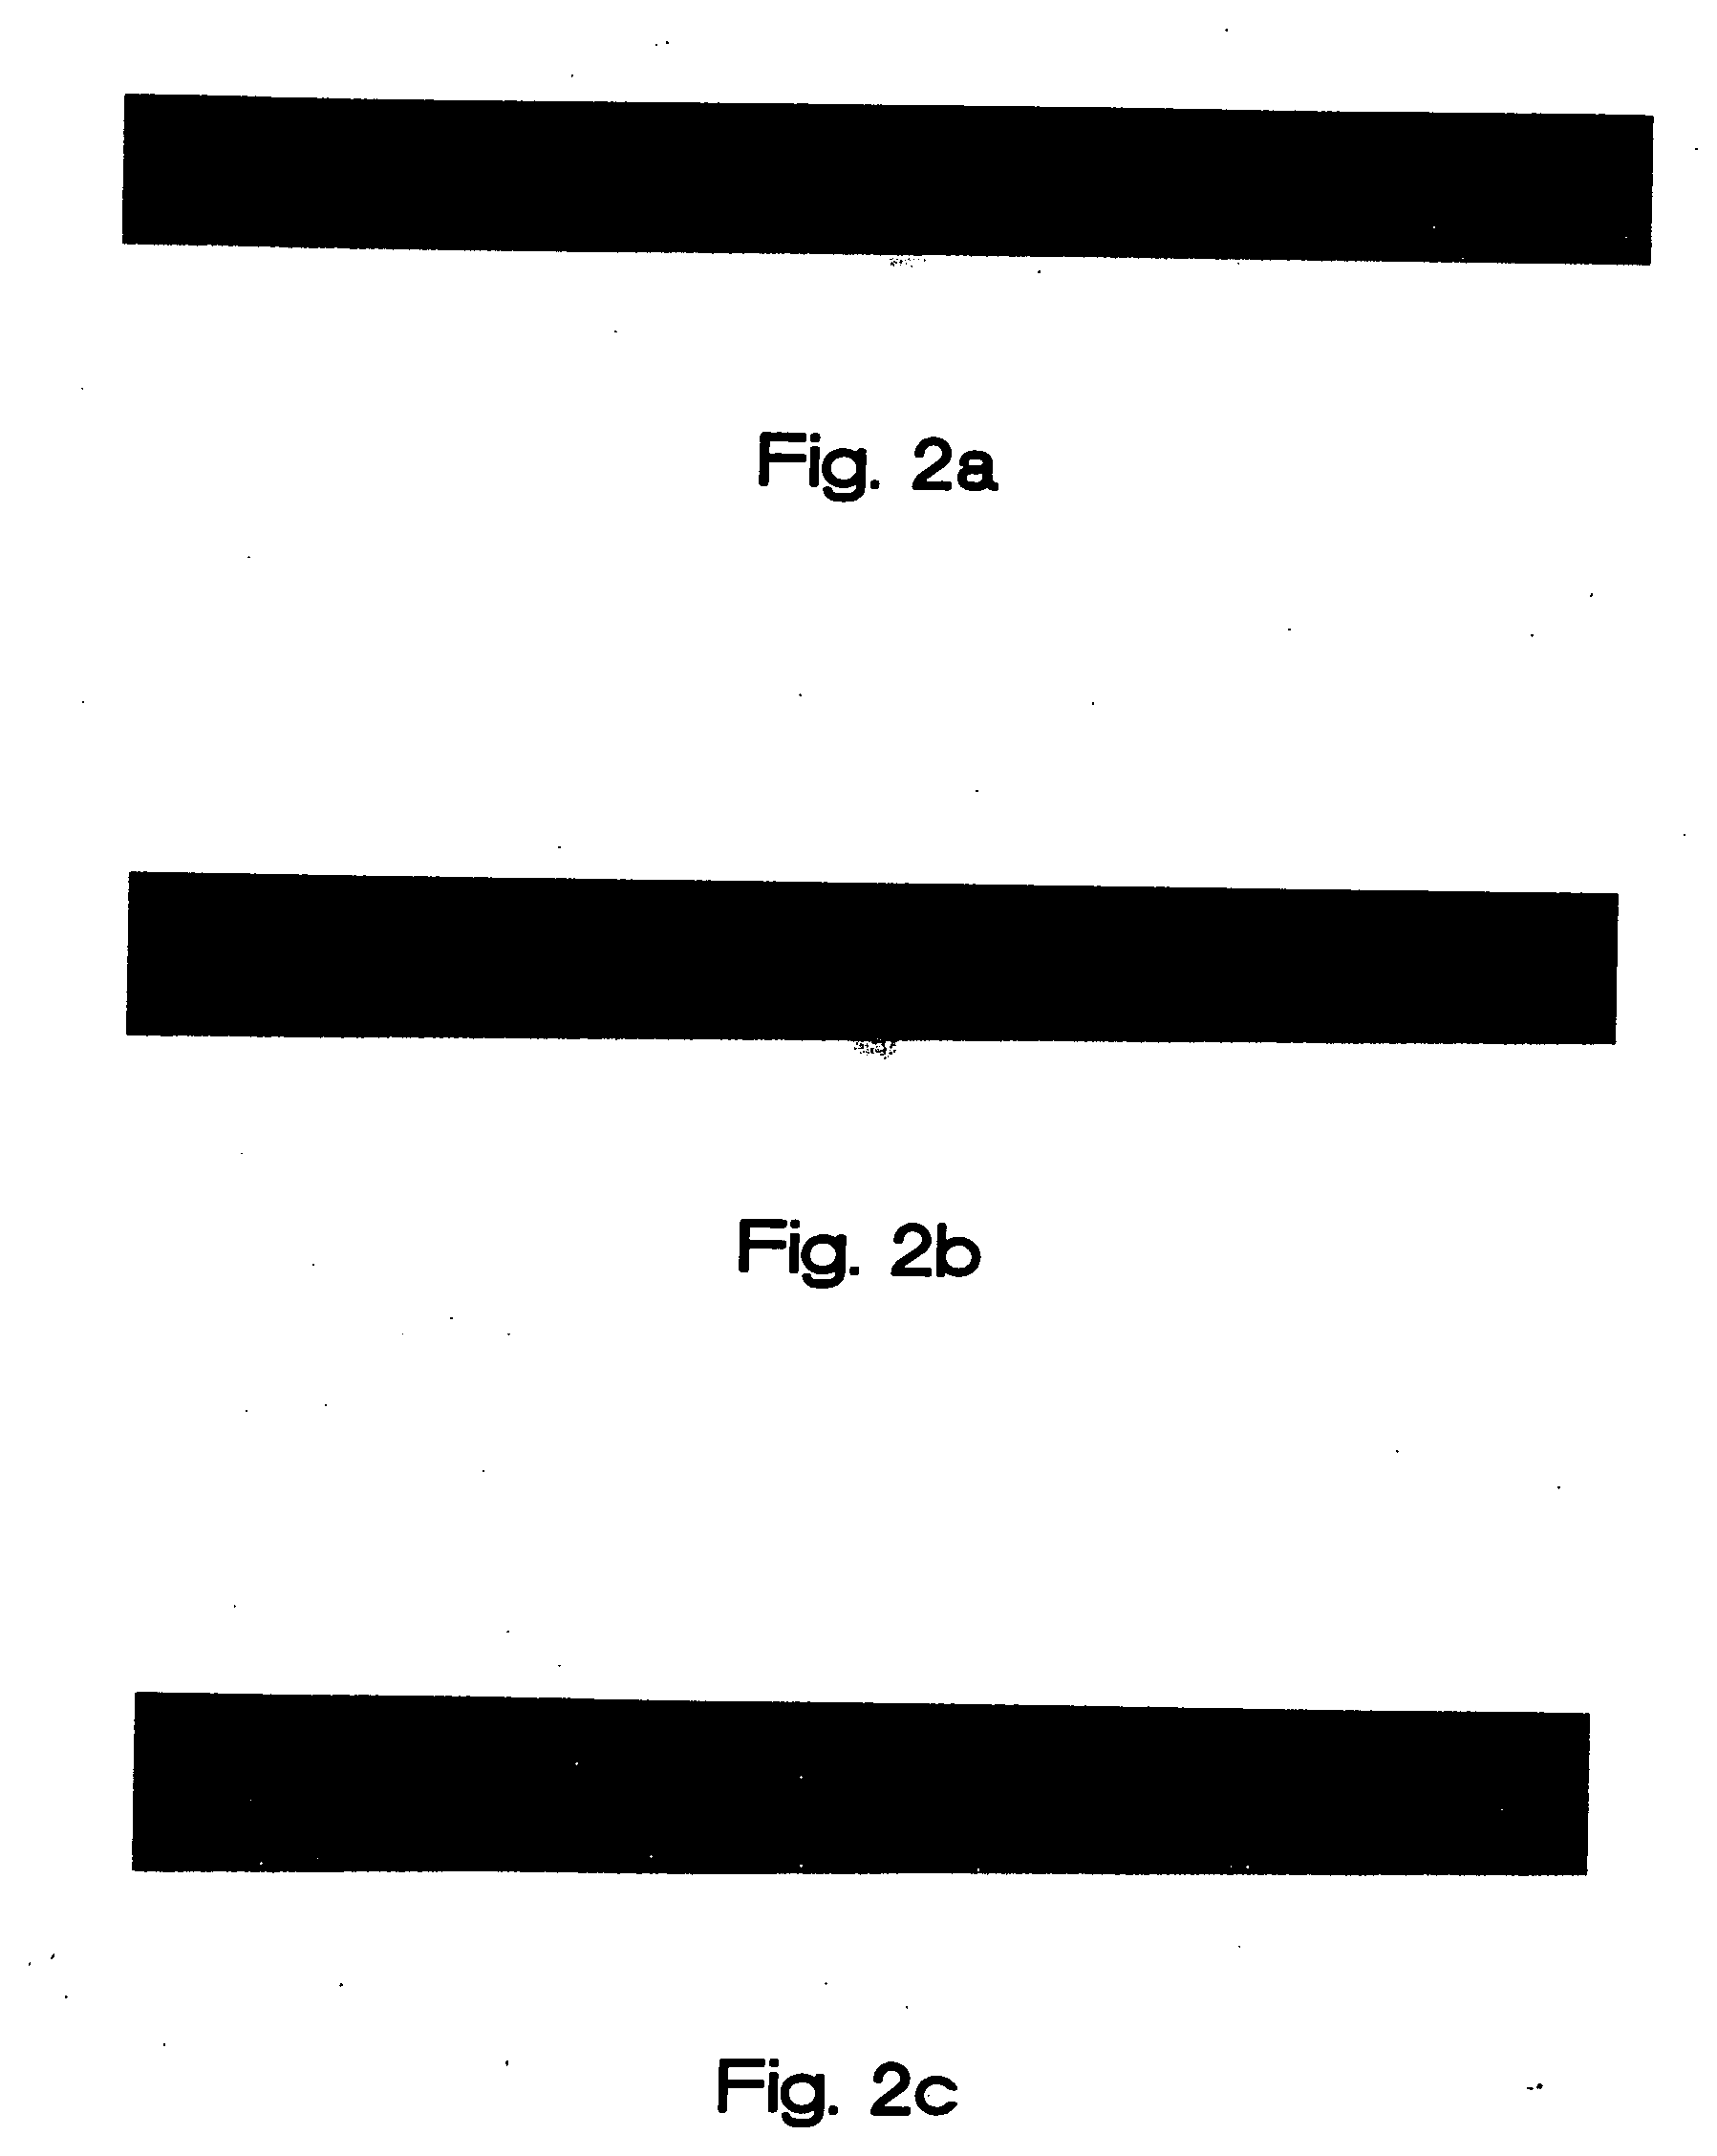 Slow-penetrating inkjet fixer composition and methods and systems for making and using same